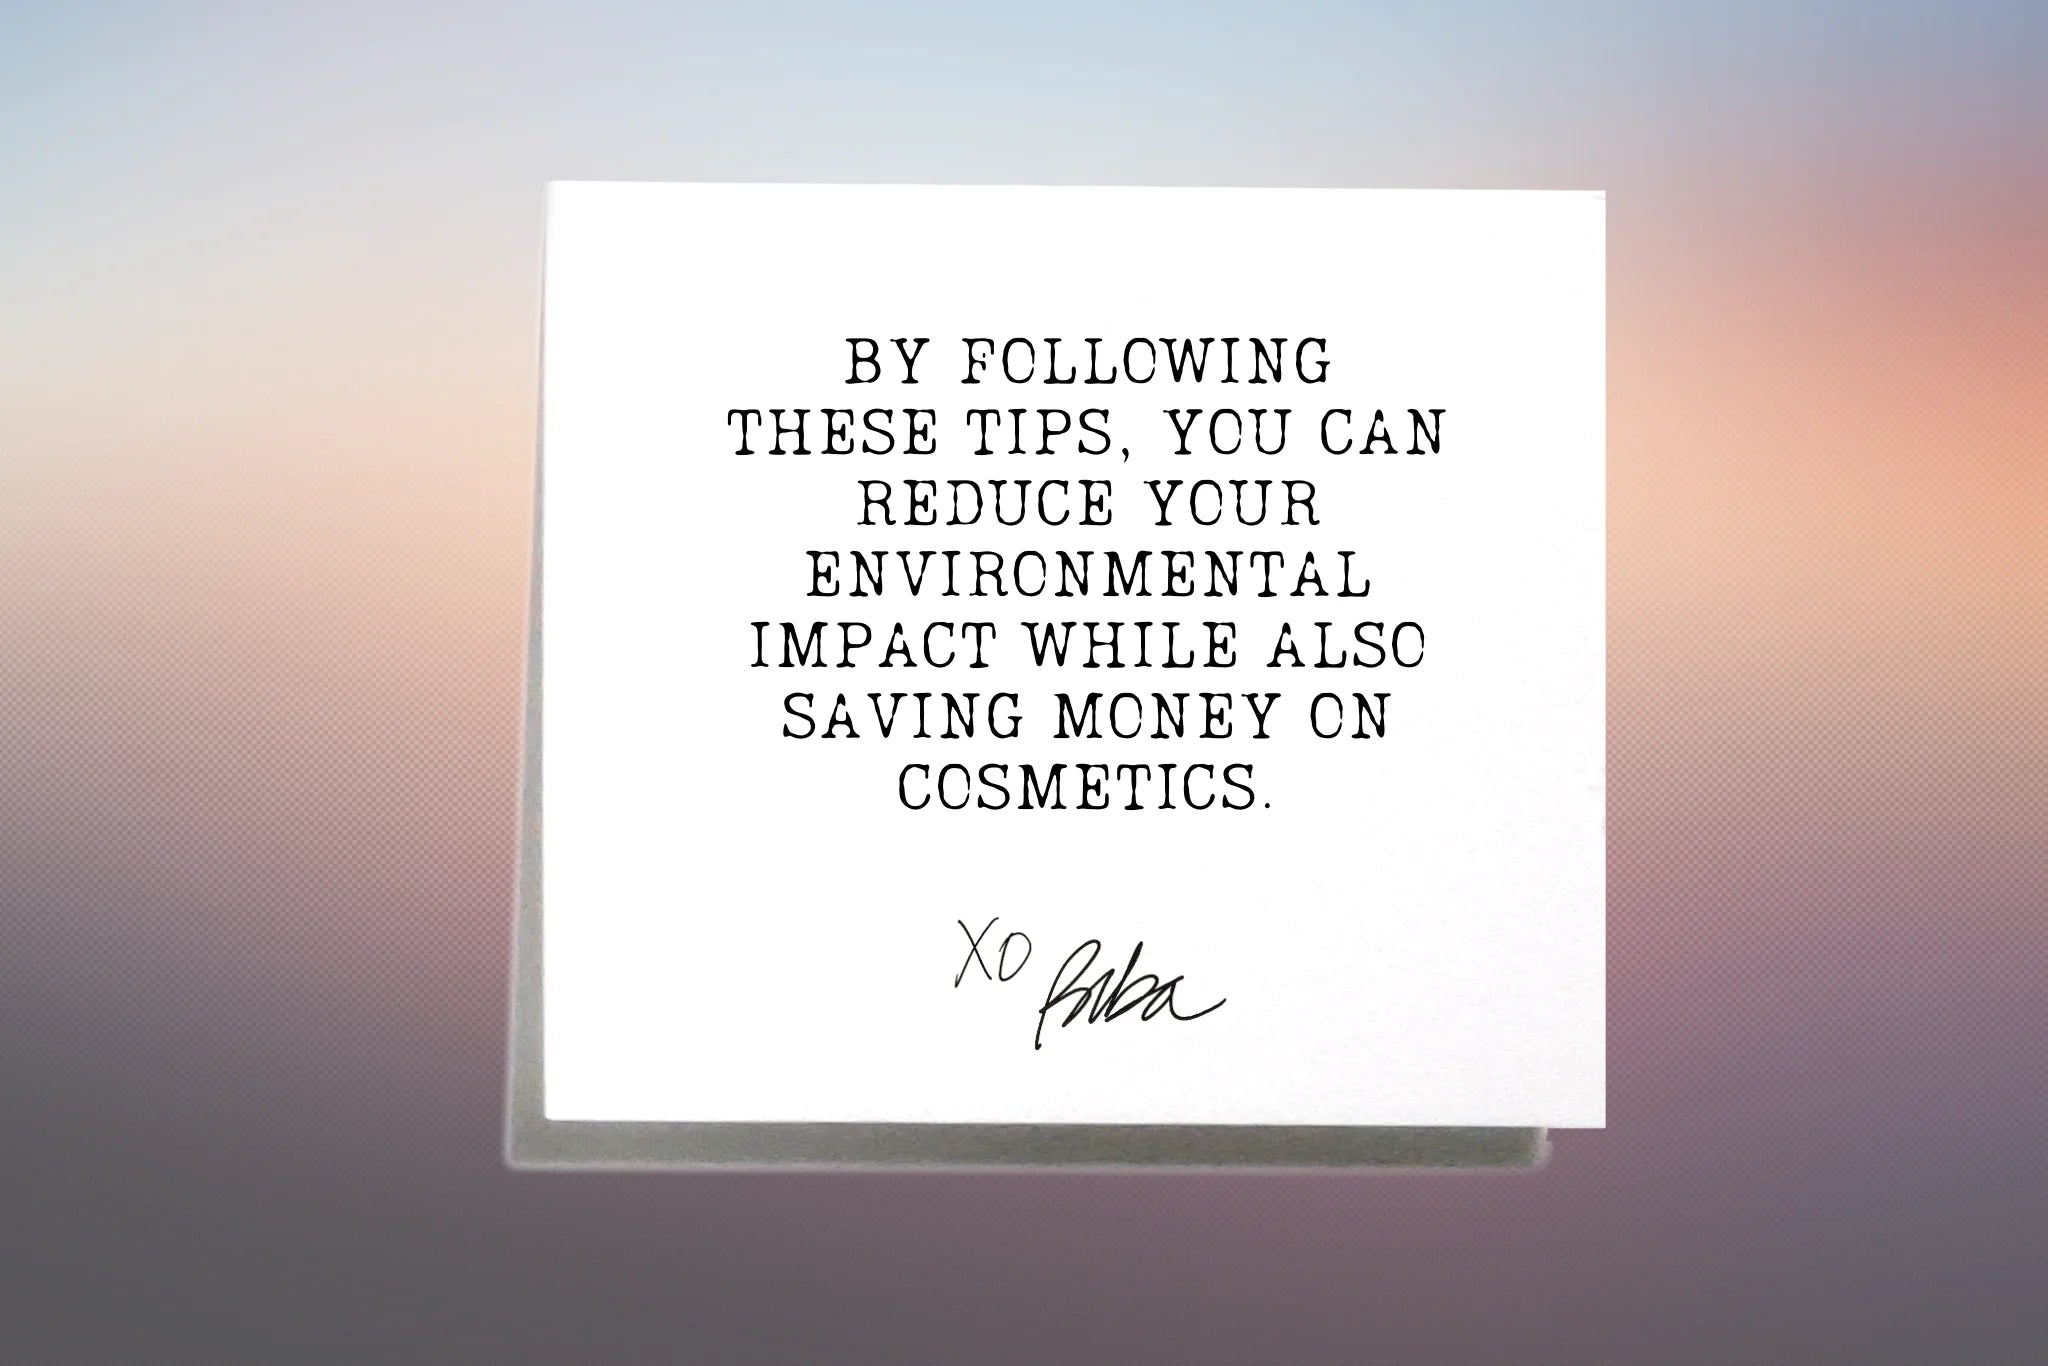 BY FOLLOWING THESE TIPS, YOU CAN REDUCE YOUR ENVIRONMENTAL IMPACT WHILE ALSO SAVING MONEY ON COSMETICS.